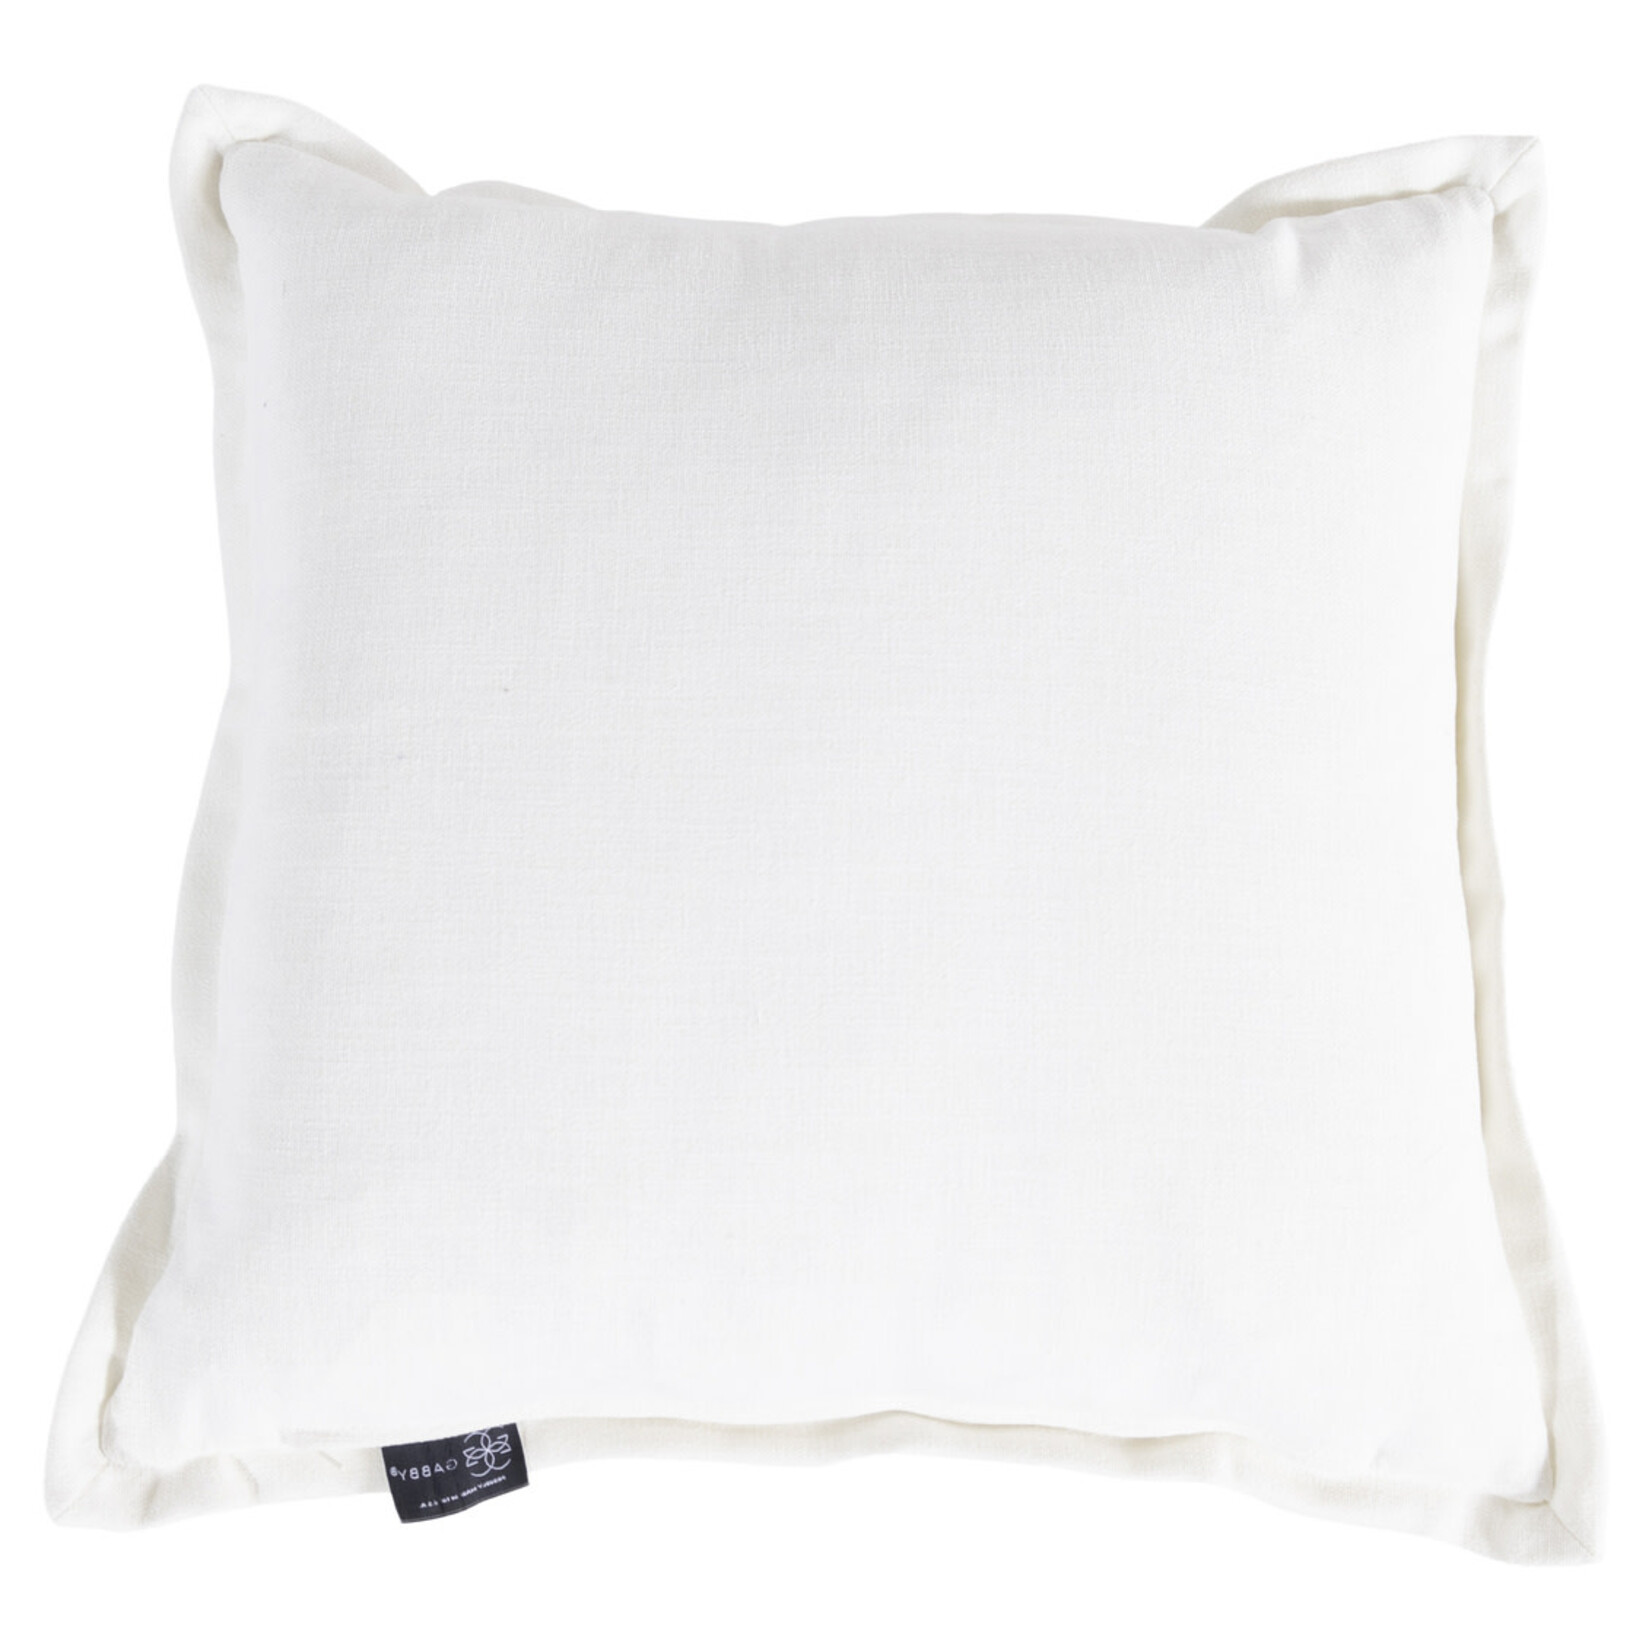 Outside The Box 24x24 Wendy Jane Slipaway Cloud Performance Fabric Accent Pillow